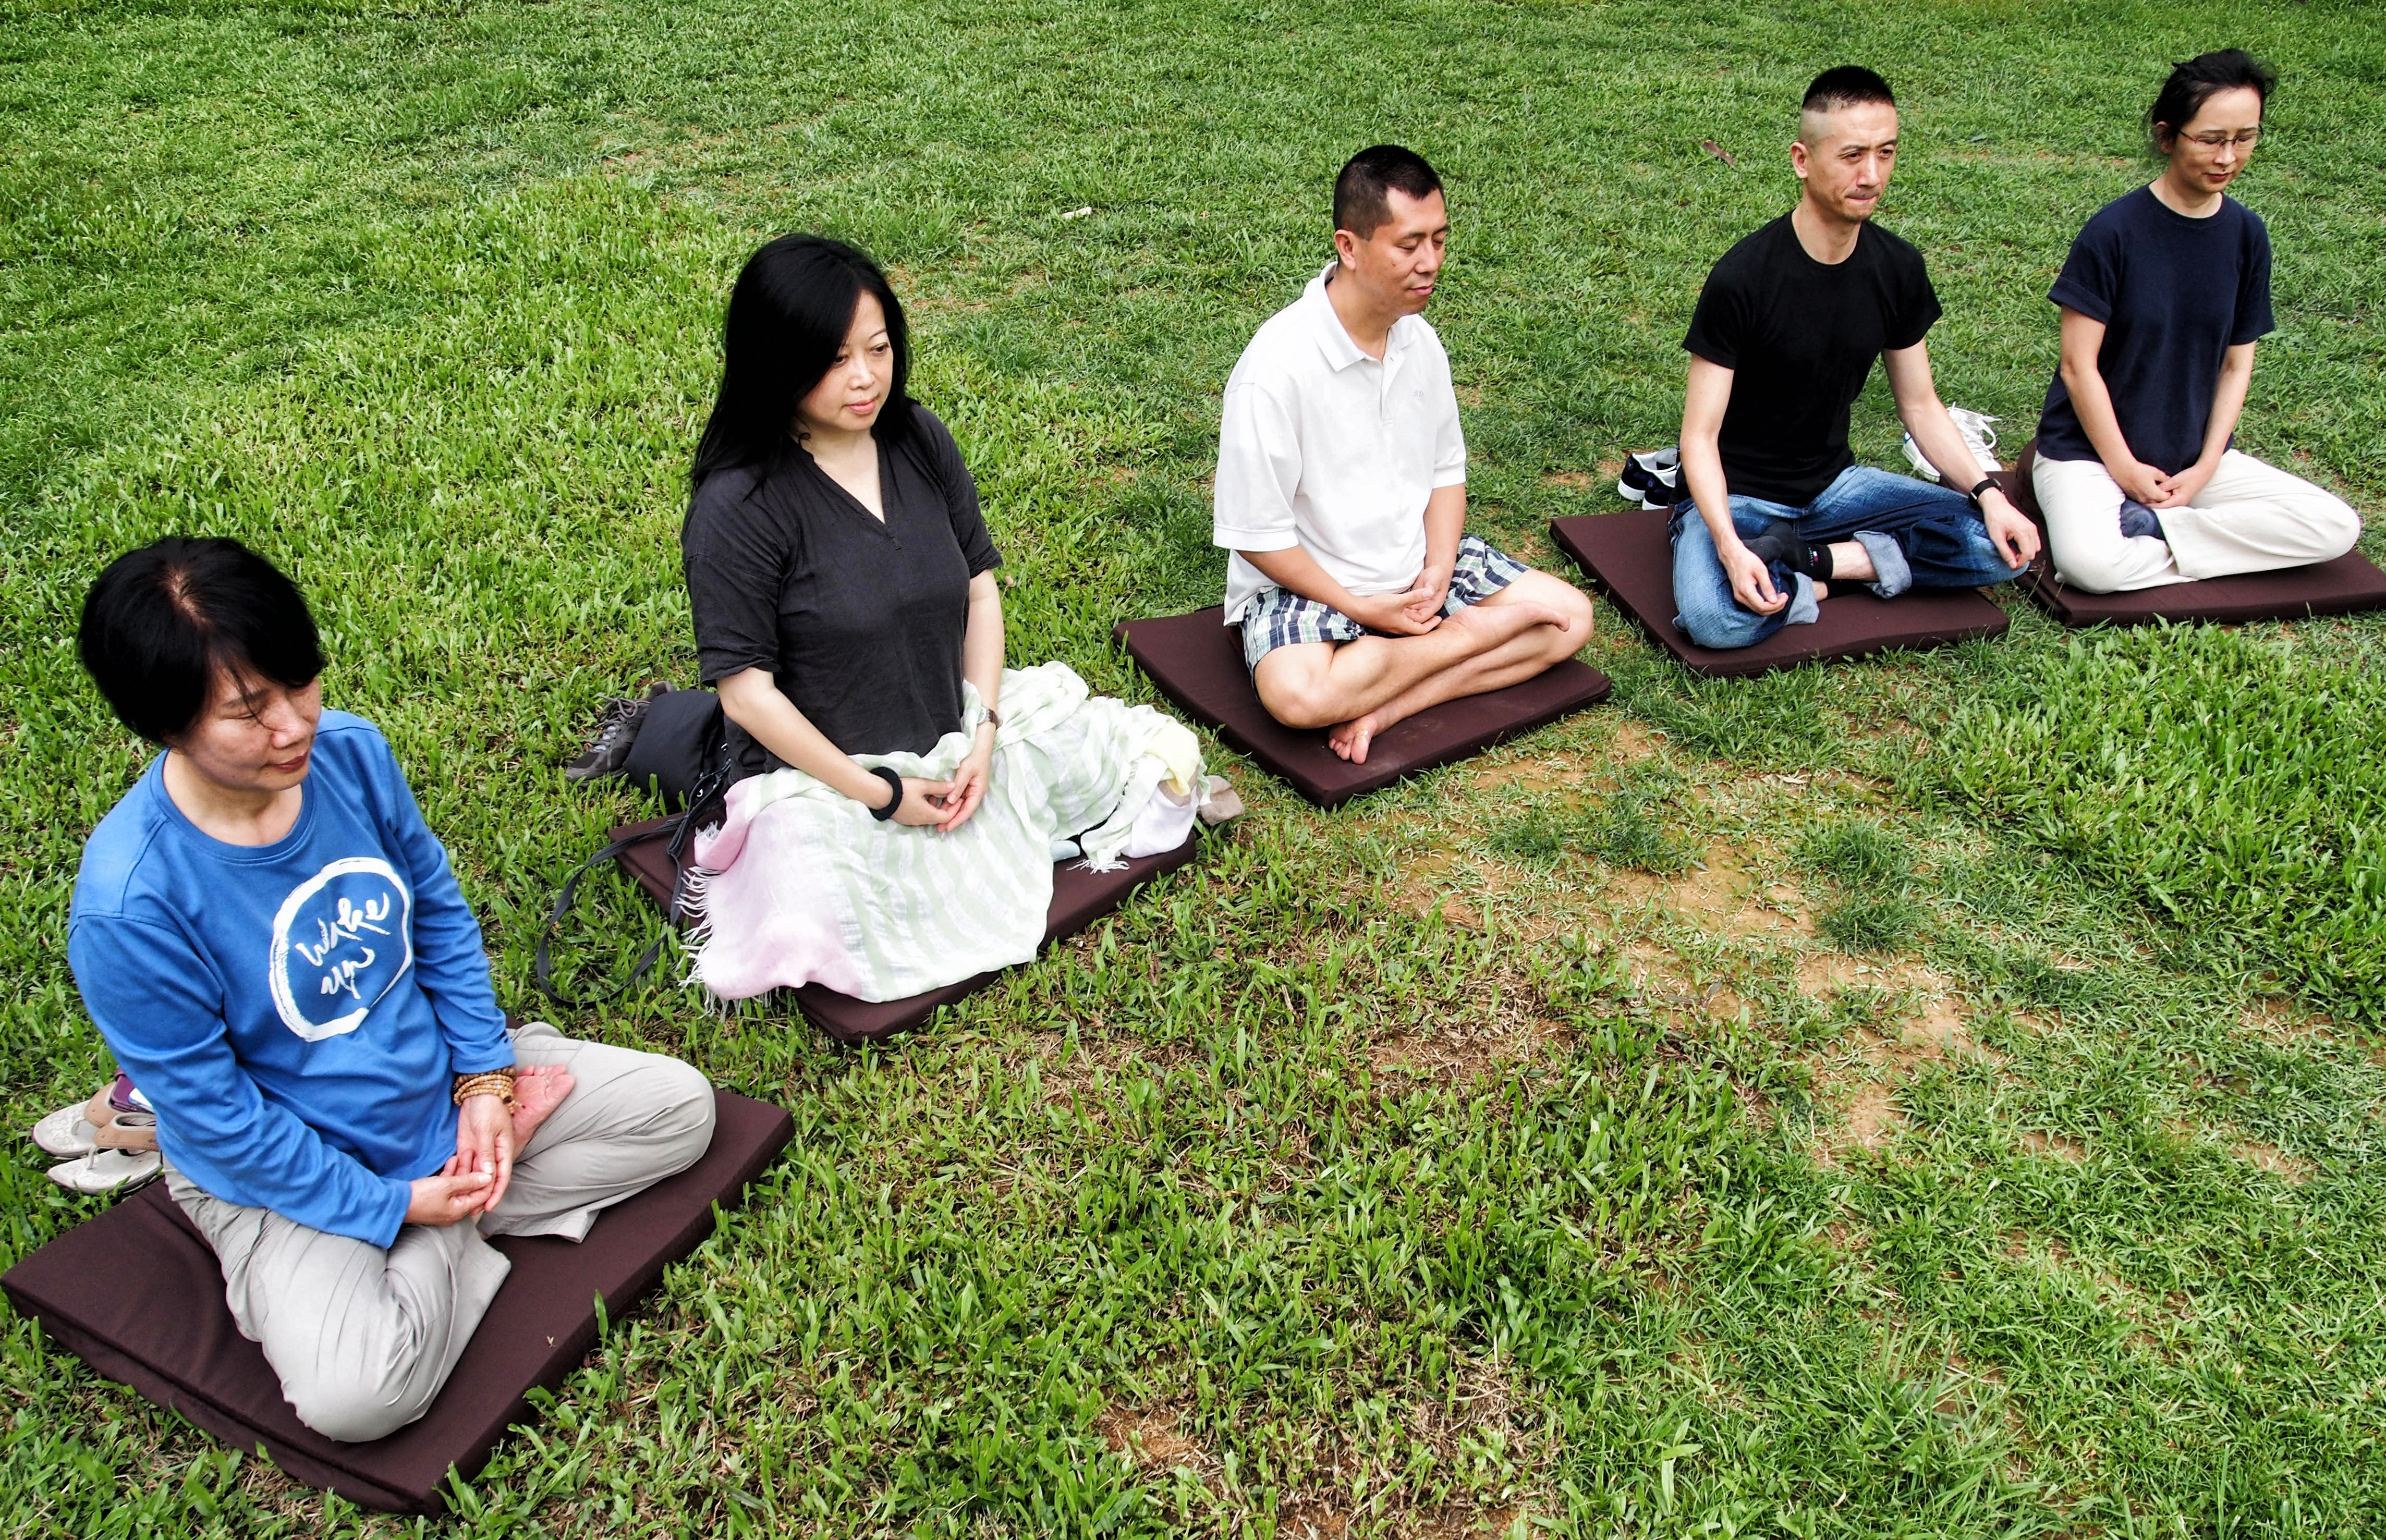 Professionals from different walks of life take part in a mindfulness retreat camp in Wu Kai Sha, Ma On Shan, in May 2013. But apart from face-to-face therapy, even online mindfulness and cognitive behavioural therapy training programmes can offer sustained benefits, a Chinese University study has shown. Photo: Thomas Yau